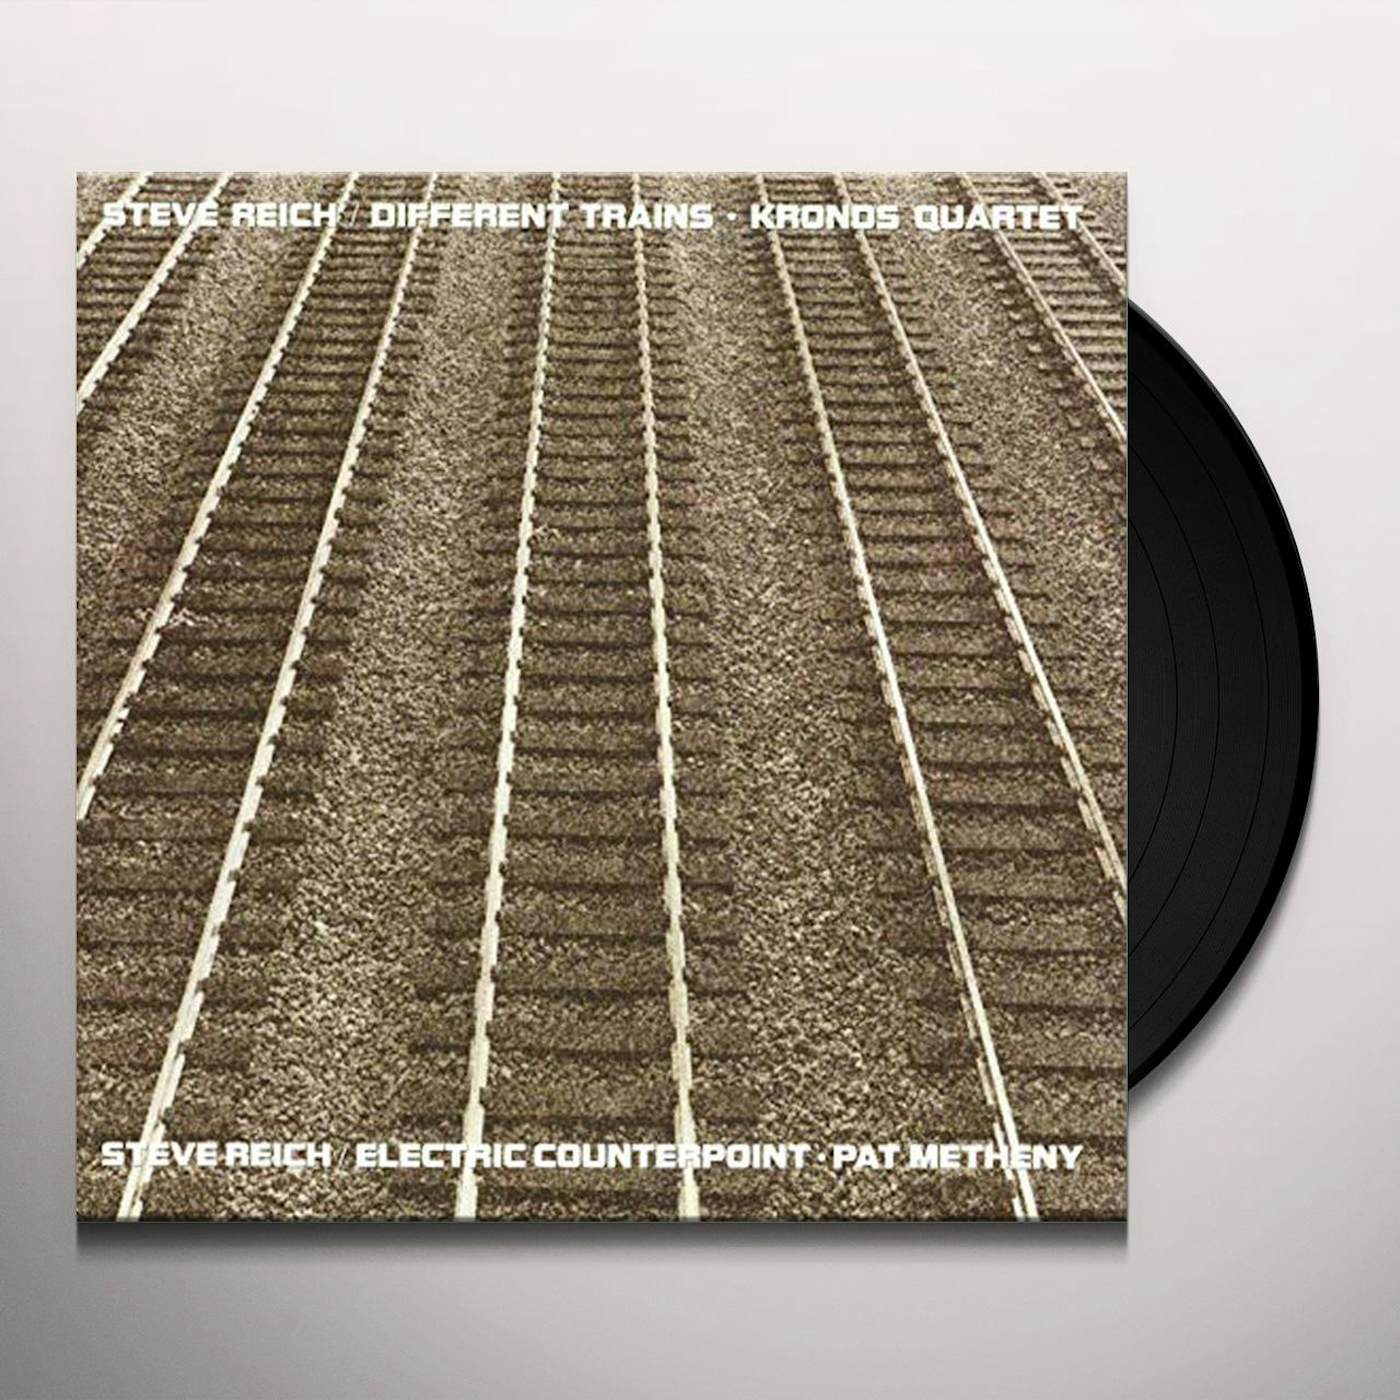 Steve Reich Different Trains / Electric Counterpoint Vinyl Record